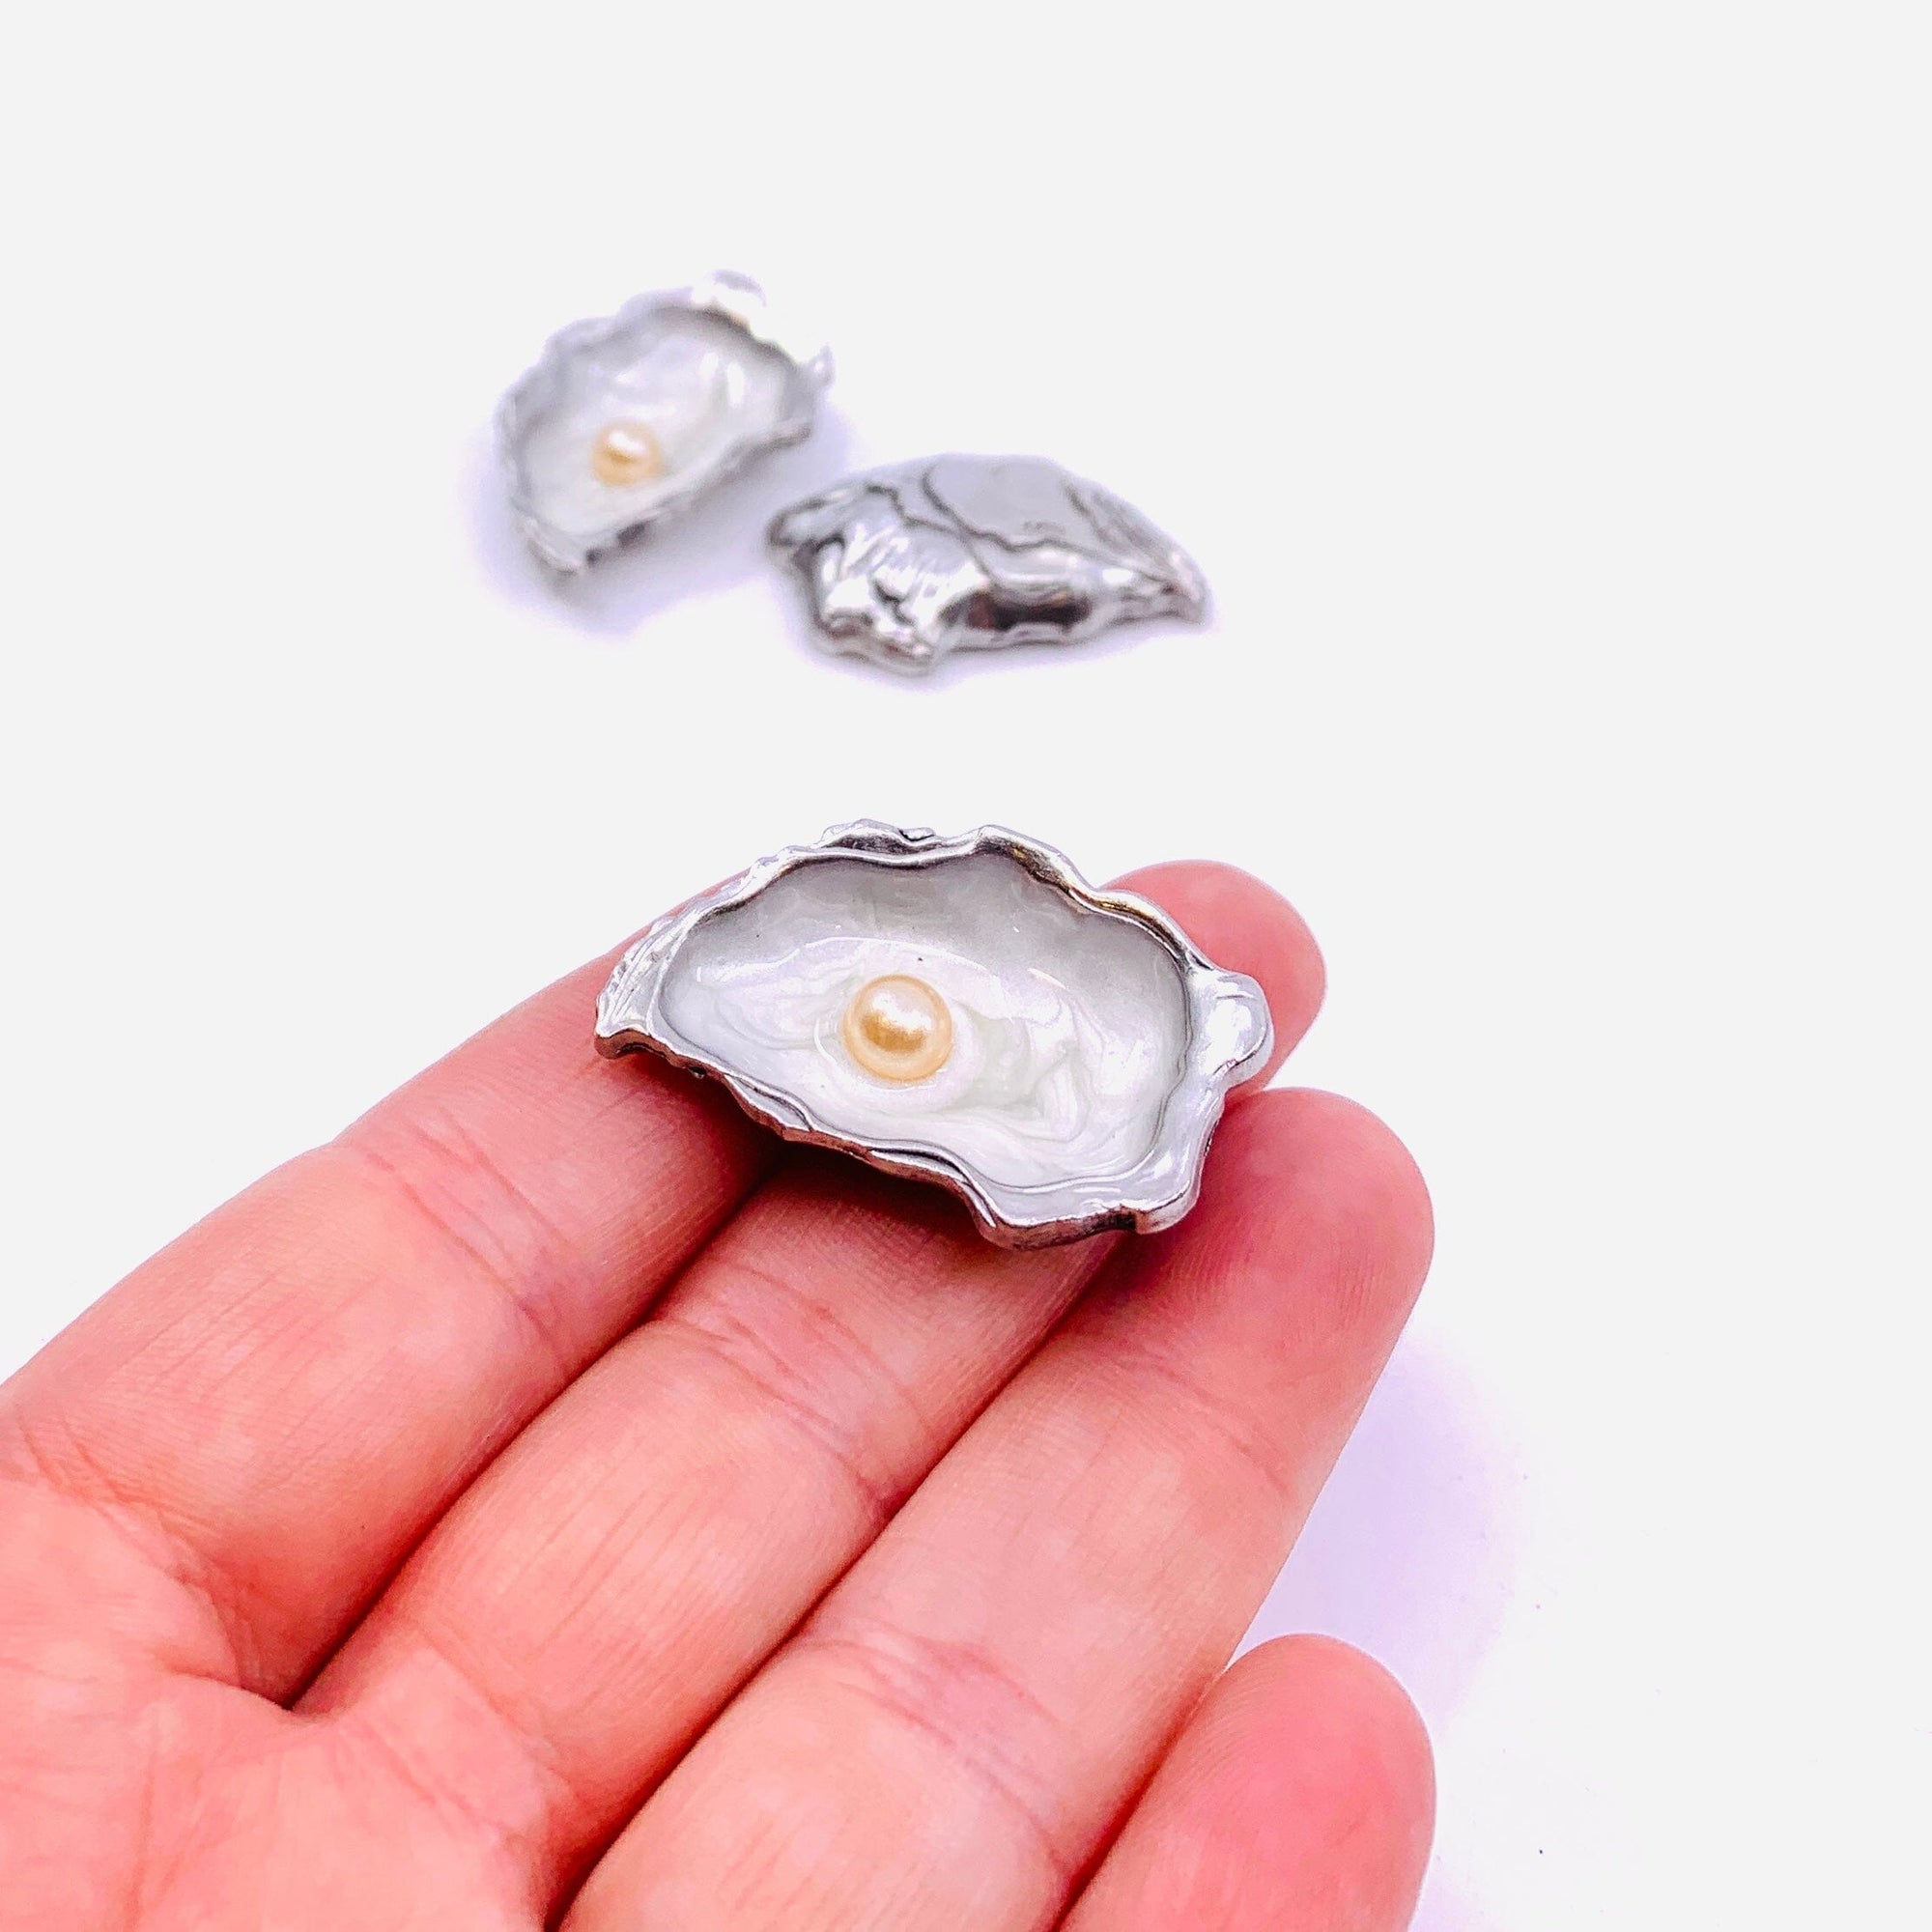 The World is Your Oyster Pocket Charm PT62 Miniature GANZ 